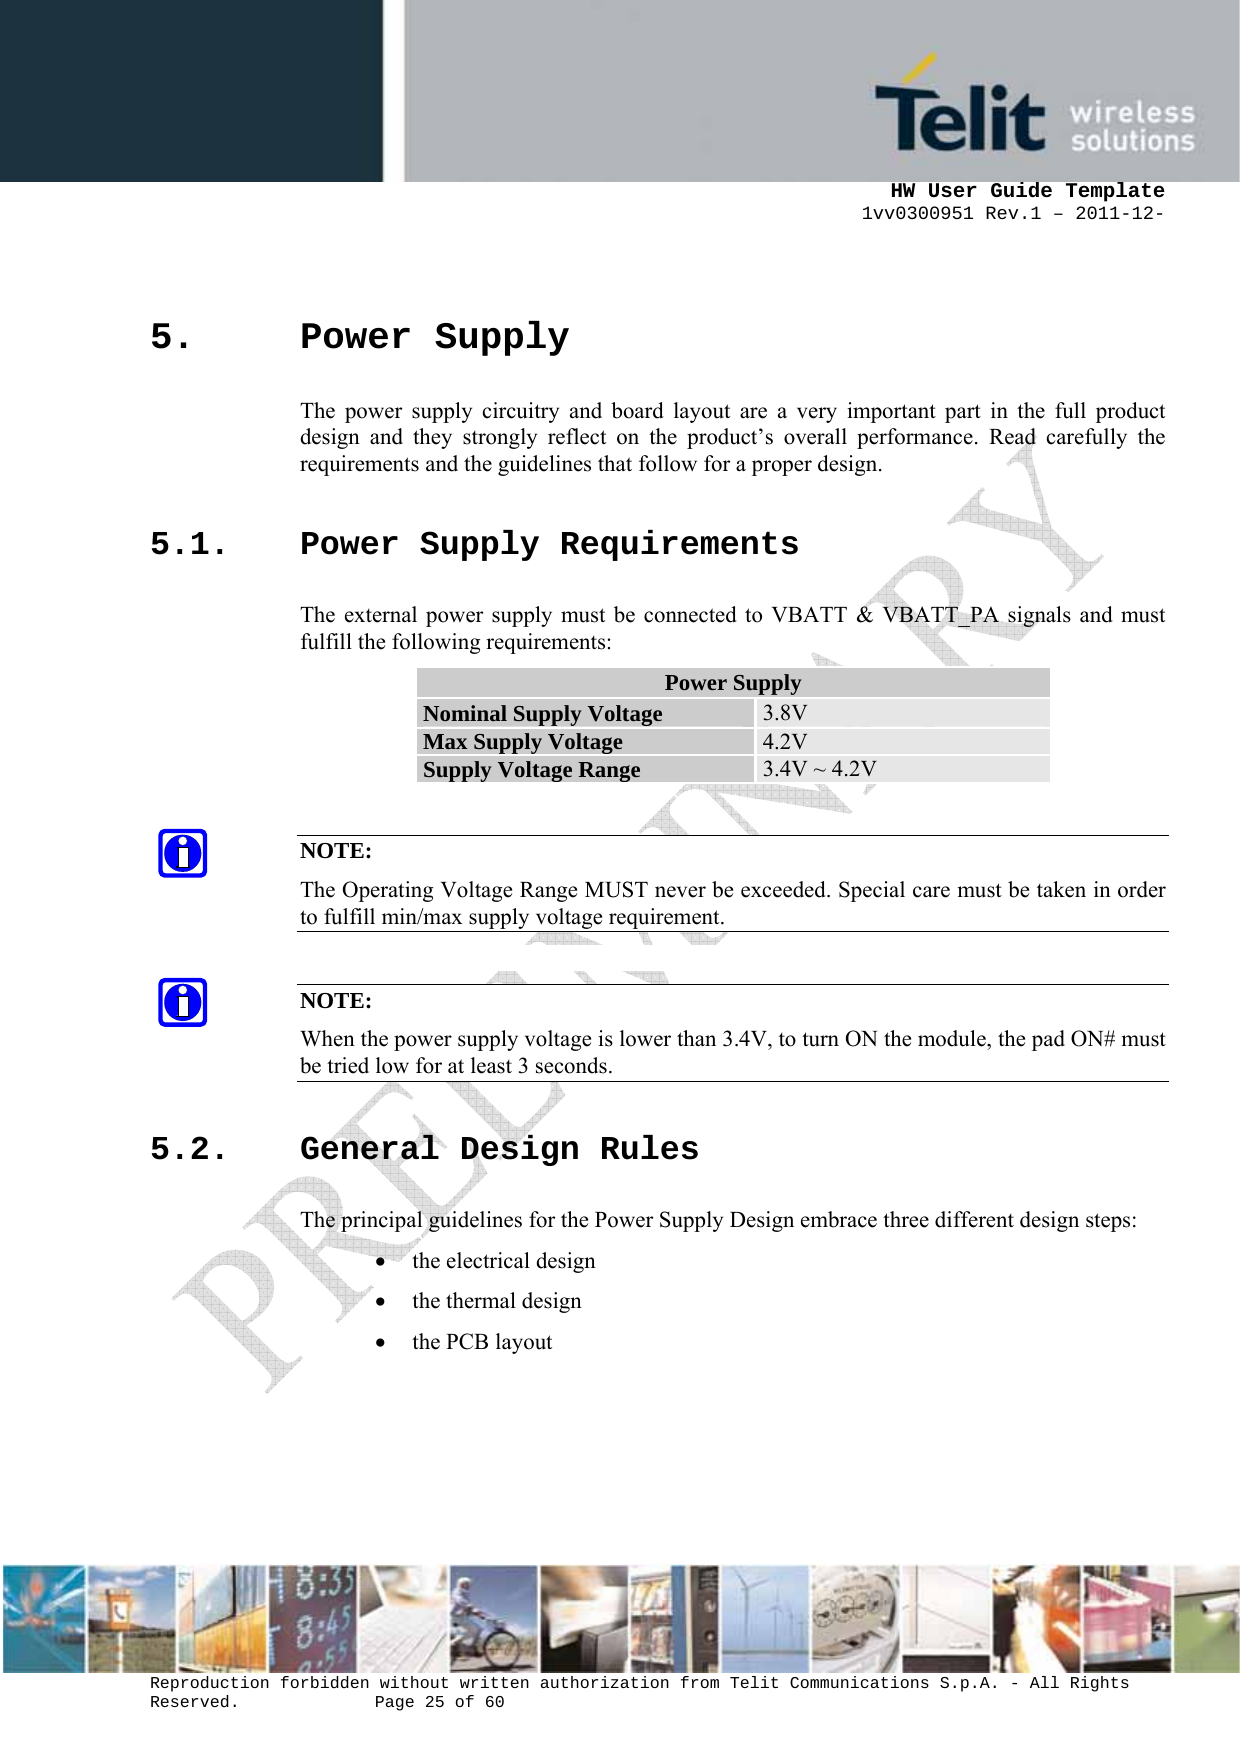      HW User Guide Template 1vv0300951 Rev.1 – 2011-12-  Reproduction forbidden without written authorization from Telit Communications S.p.A. - All Rights Reserved.    Page 25 of 60                                                     5. Power Supply The power supply circuitry and board layout are a very important part in the full product design and they strongly reflect on the product’s overall performance. Read carefully the requirements and the guidelines that follow for a proper design. 5.1. Power Supply Requirements The external power supply must be connected to VBATT &amp; VBATT_PA signals and must fulfill the following requirements: Power Supply Nominal Supply Voltage  3.8V Max Supply Voltage  4.2V Supply Voltage Range  3.4V ~ 4.2V  NOTE: The Operating Voltage Range MUST never be exceeded. Special care must be taken in order to fulfill min/max supply voltage requirement.  NOTE: When the power supply voltage is lower than 3.4V, to turn ON the module, the pad ON# must be tried low for at least 3 seconds. 5.2. General Design Rules The principal guidelines for the Power Supply Design embrace three different design steps: • the electrical design • the thermal design • the PCB layout   